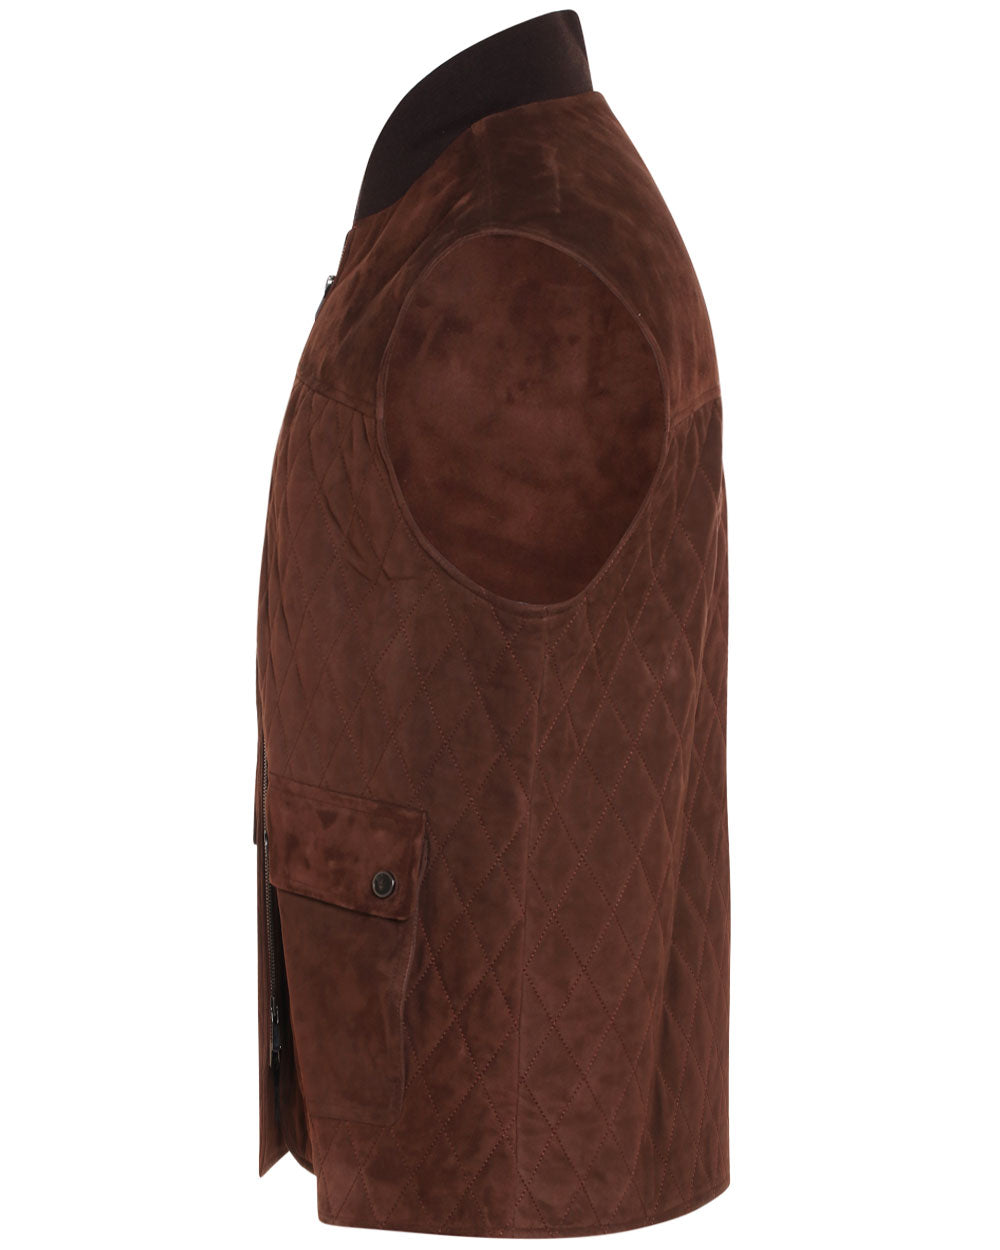 Brown Quilted Suede Padded Vest